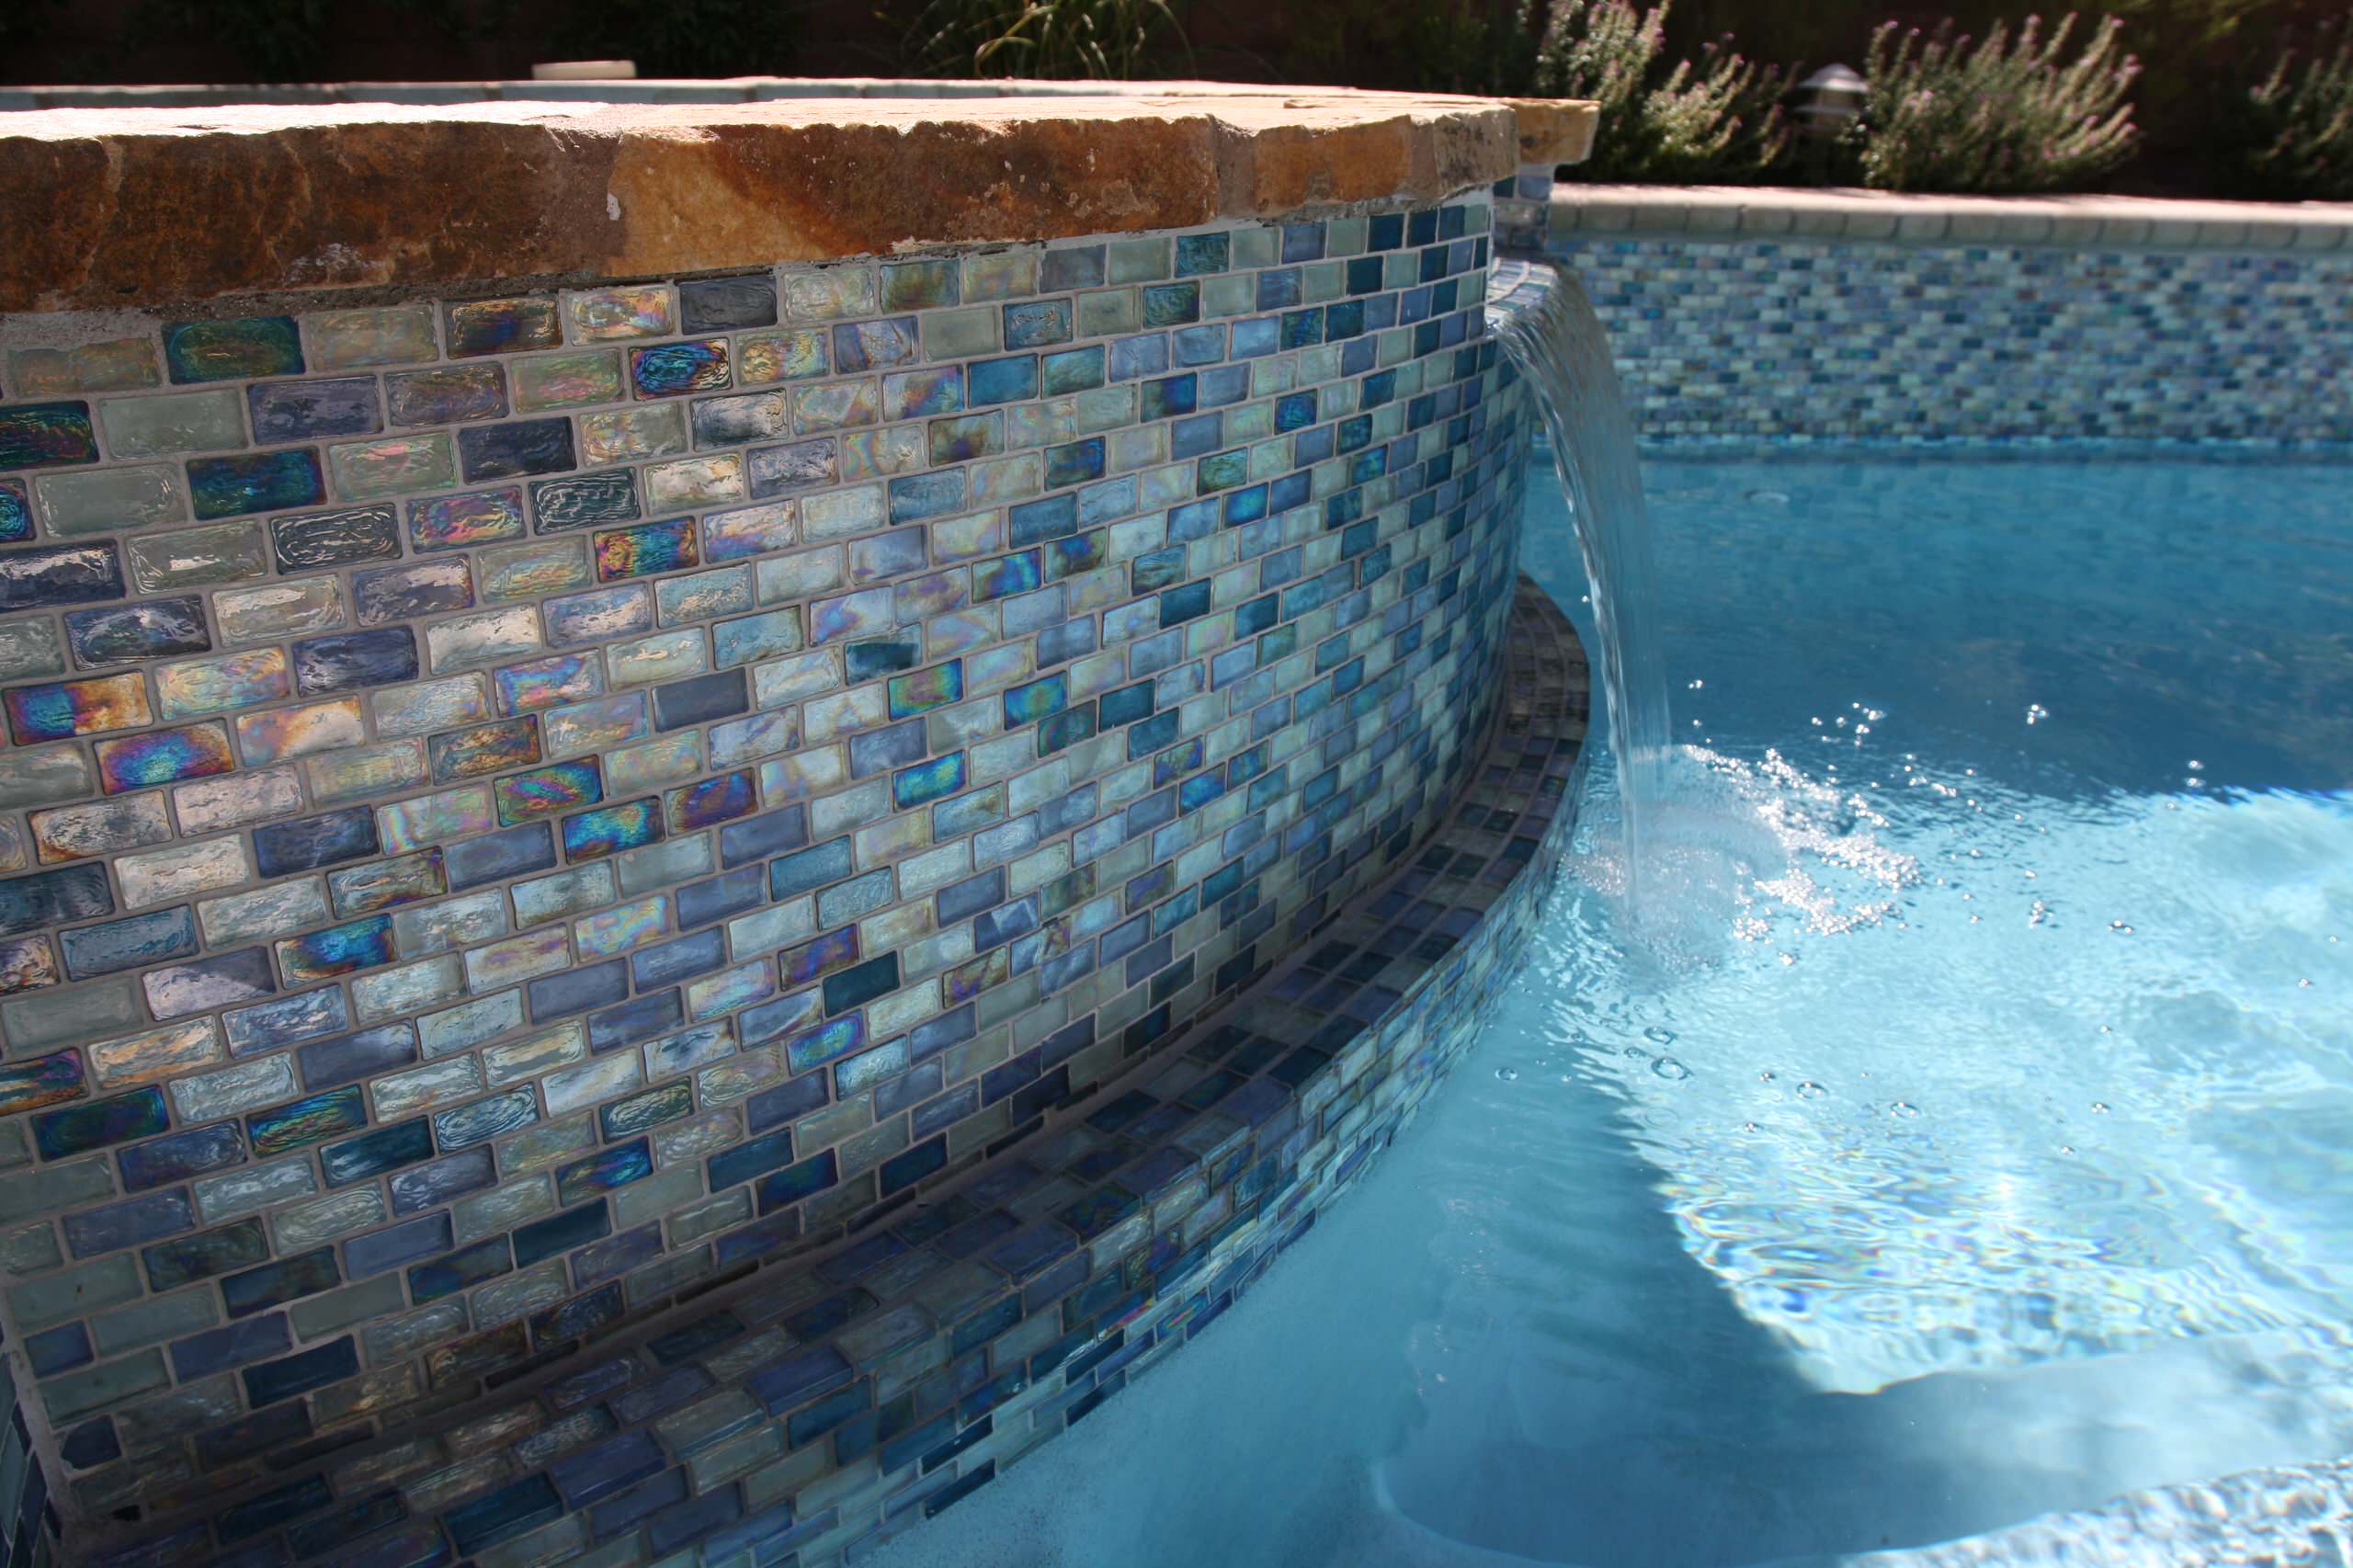 2 Glass Tile Surrounds The Pool, Swimming Pool Glass Tile Cleaner